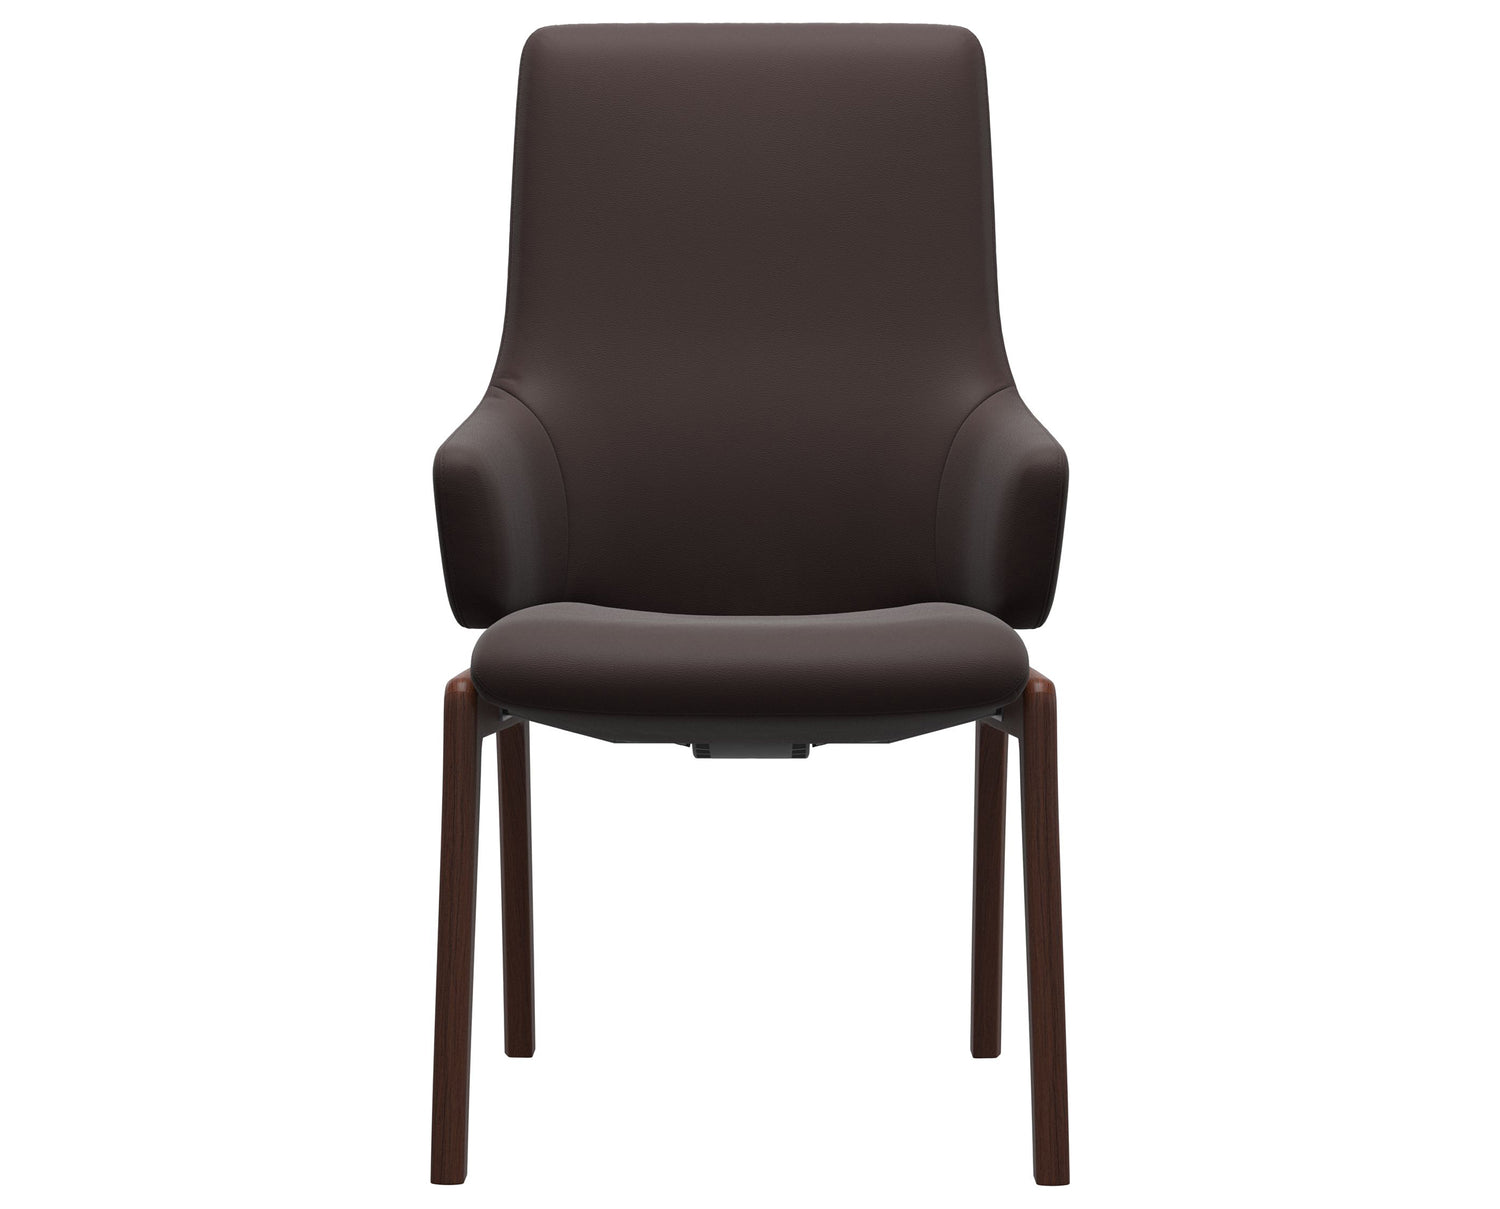 Paloma Leather Chocolate & Walnut Base | Stressless Laurel High Back D100 Dining Chair w/Arms | Valley Ridge Furniture